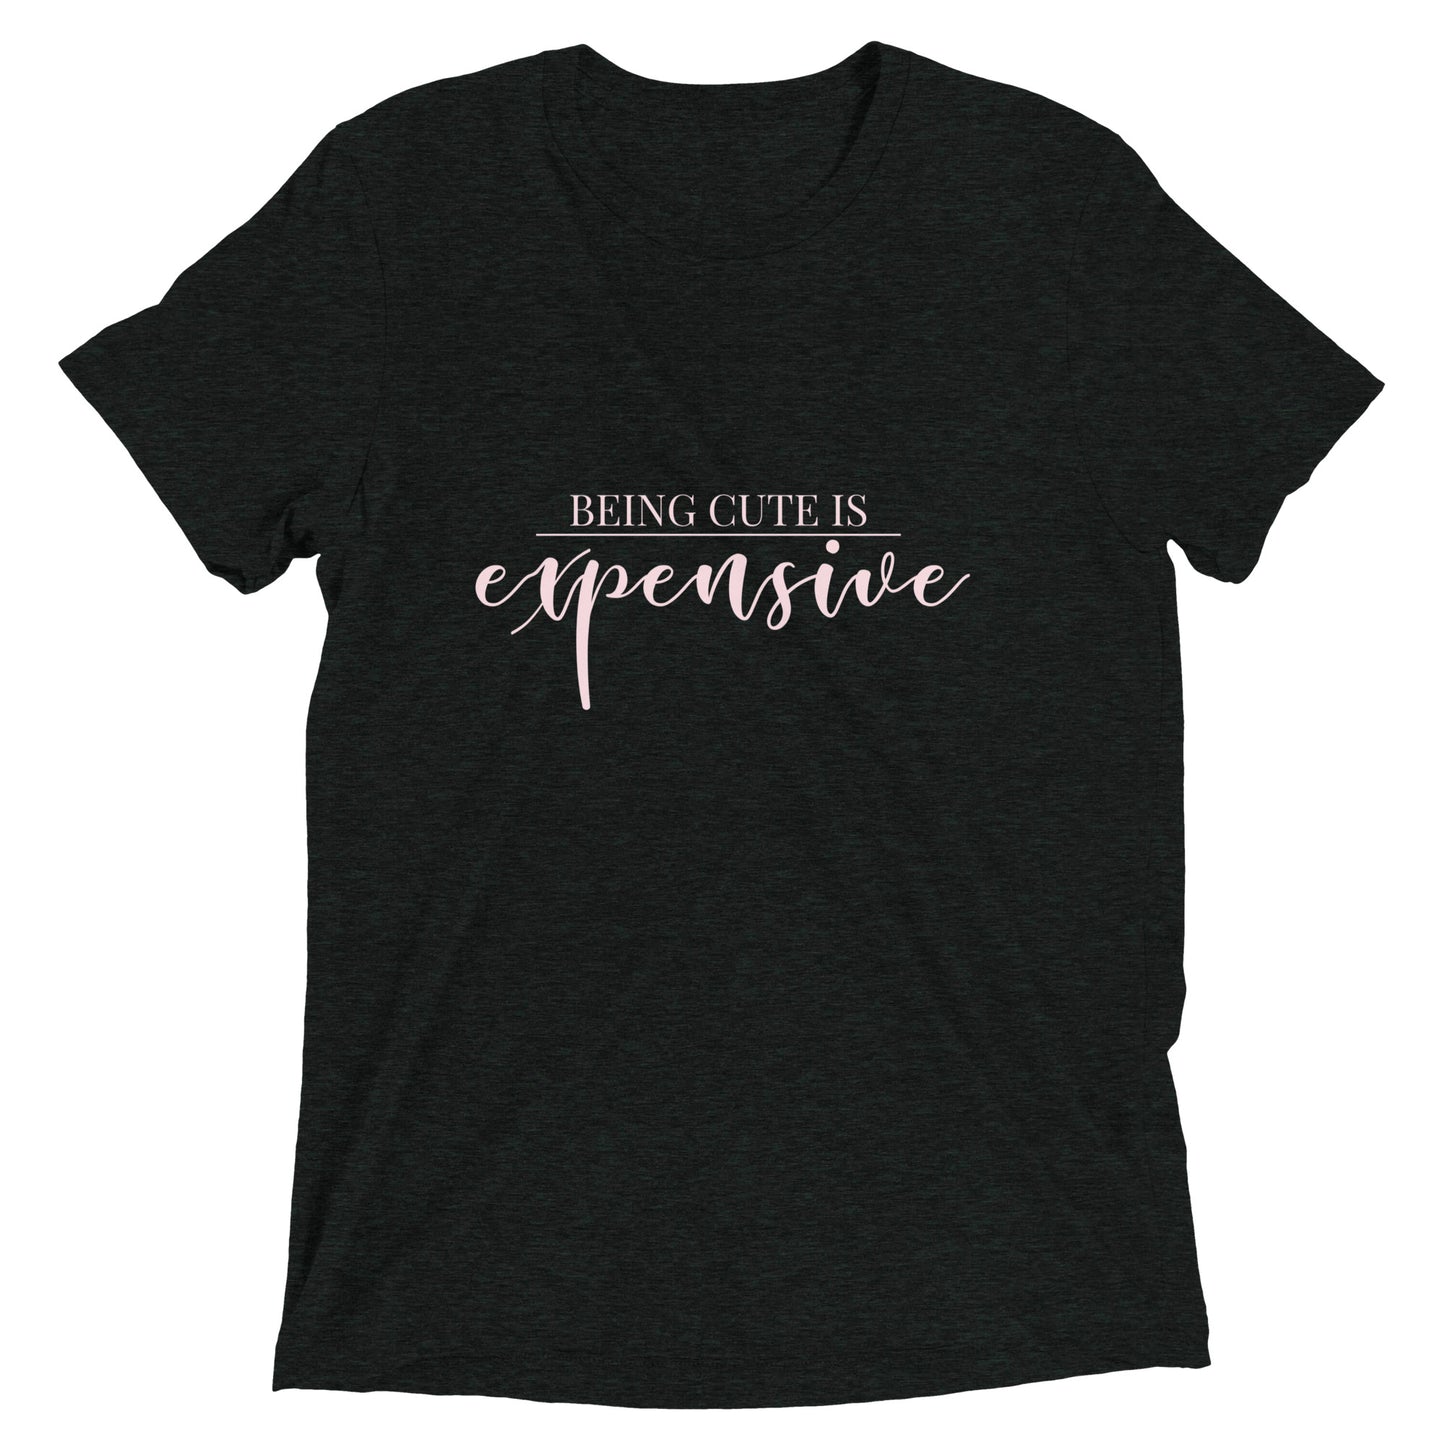 Iconic "Being Cute is Expensive" Short sleeve t-shirt